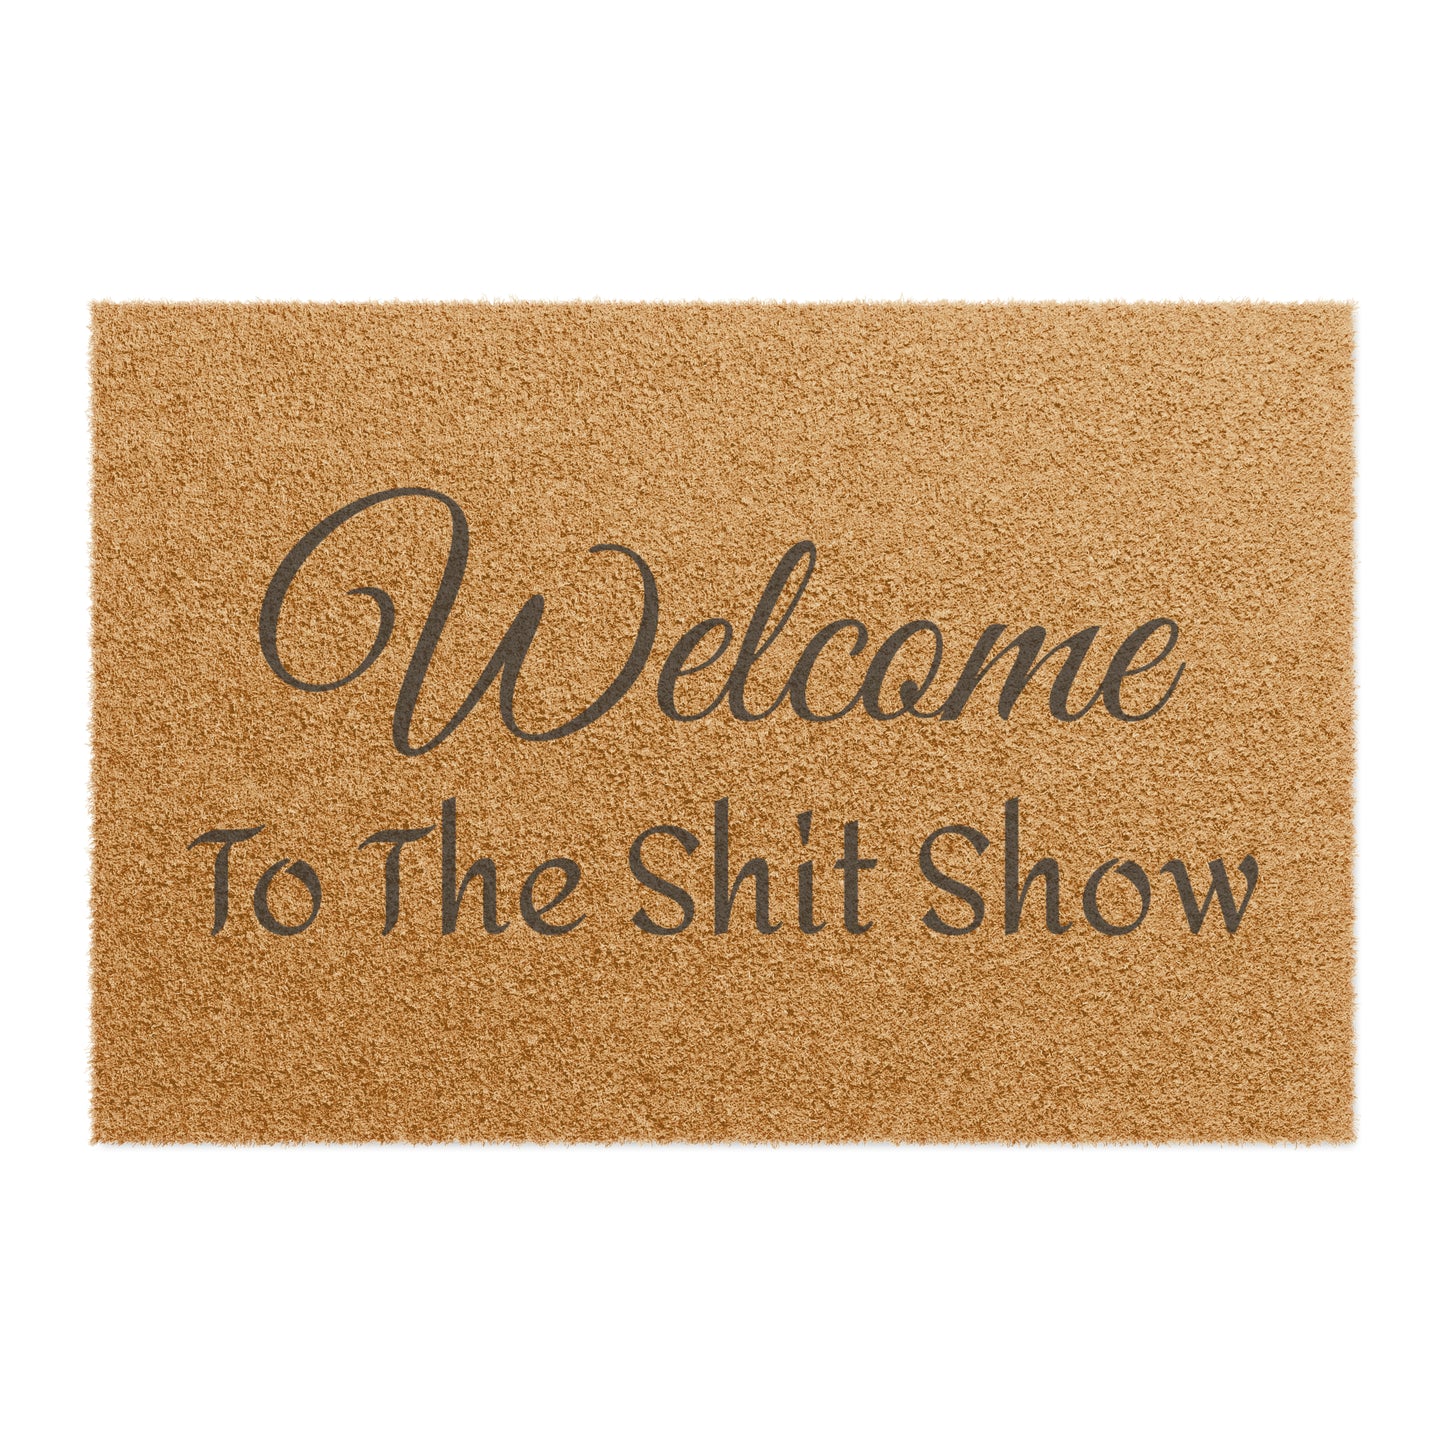 welcome to the shit show Doormat